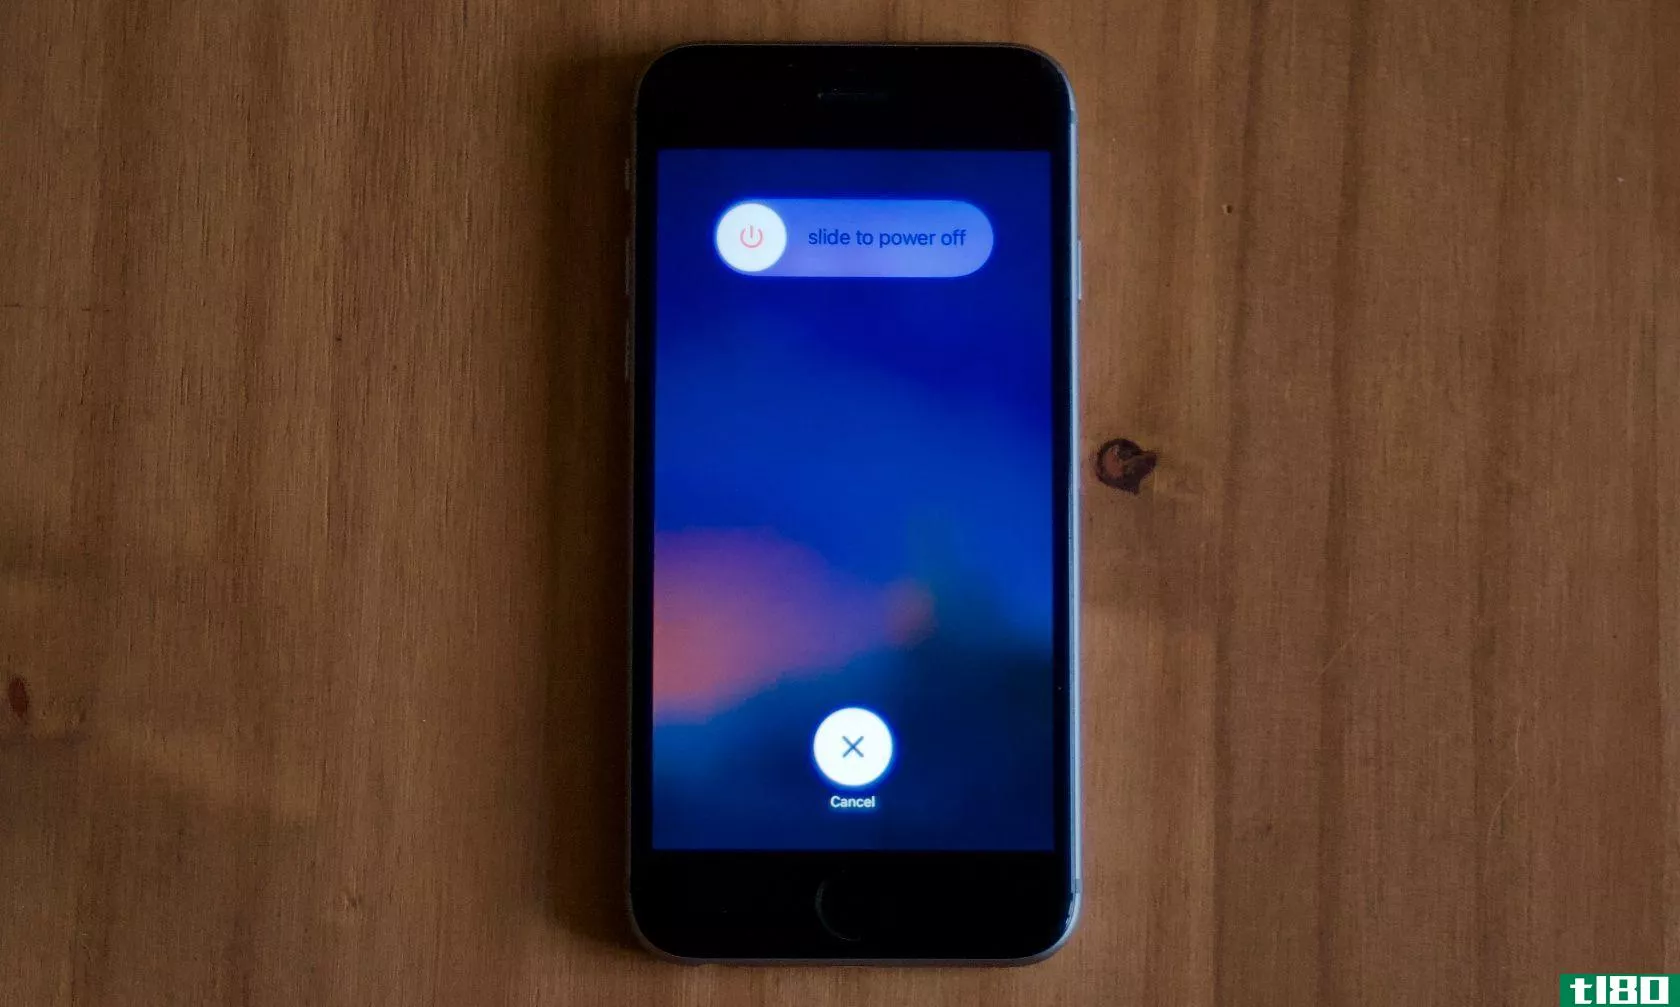 Slide to power off screen on iPhone 6S